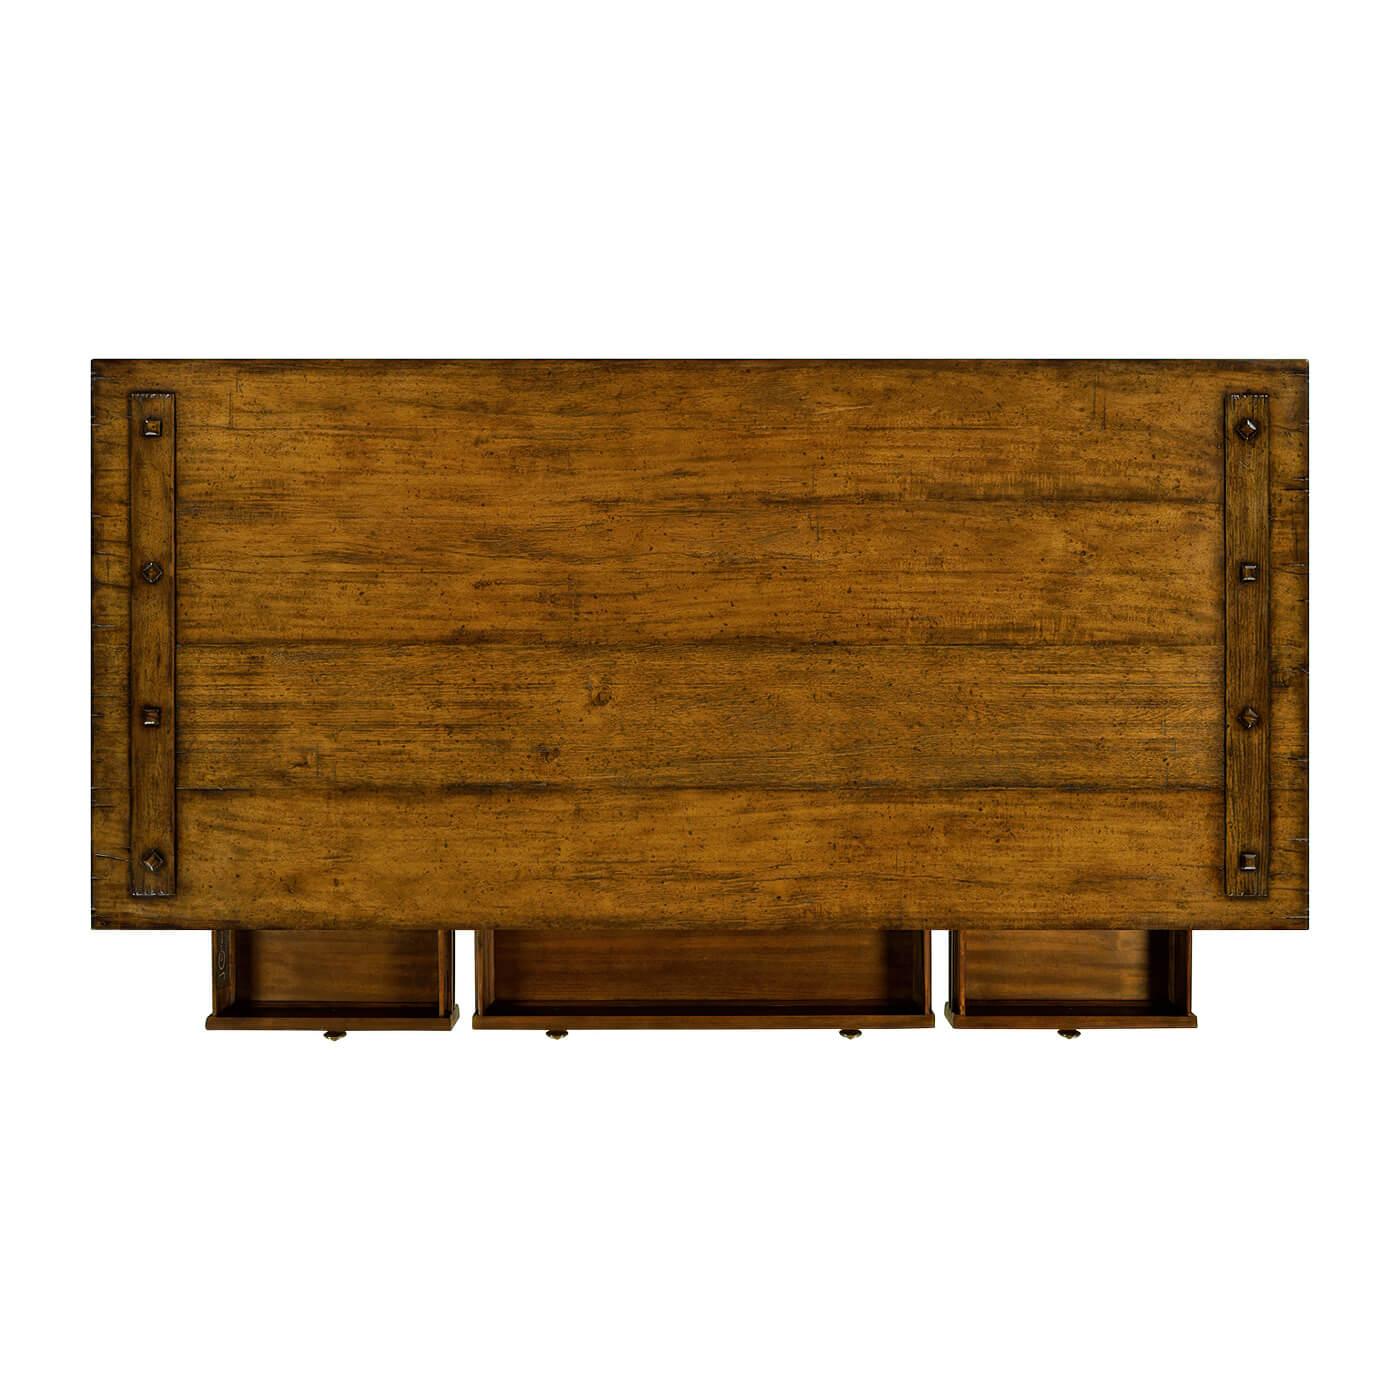 Contemporary Rustic Country Walnut Desk For Sale